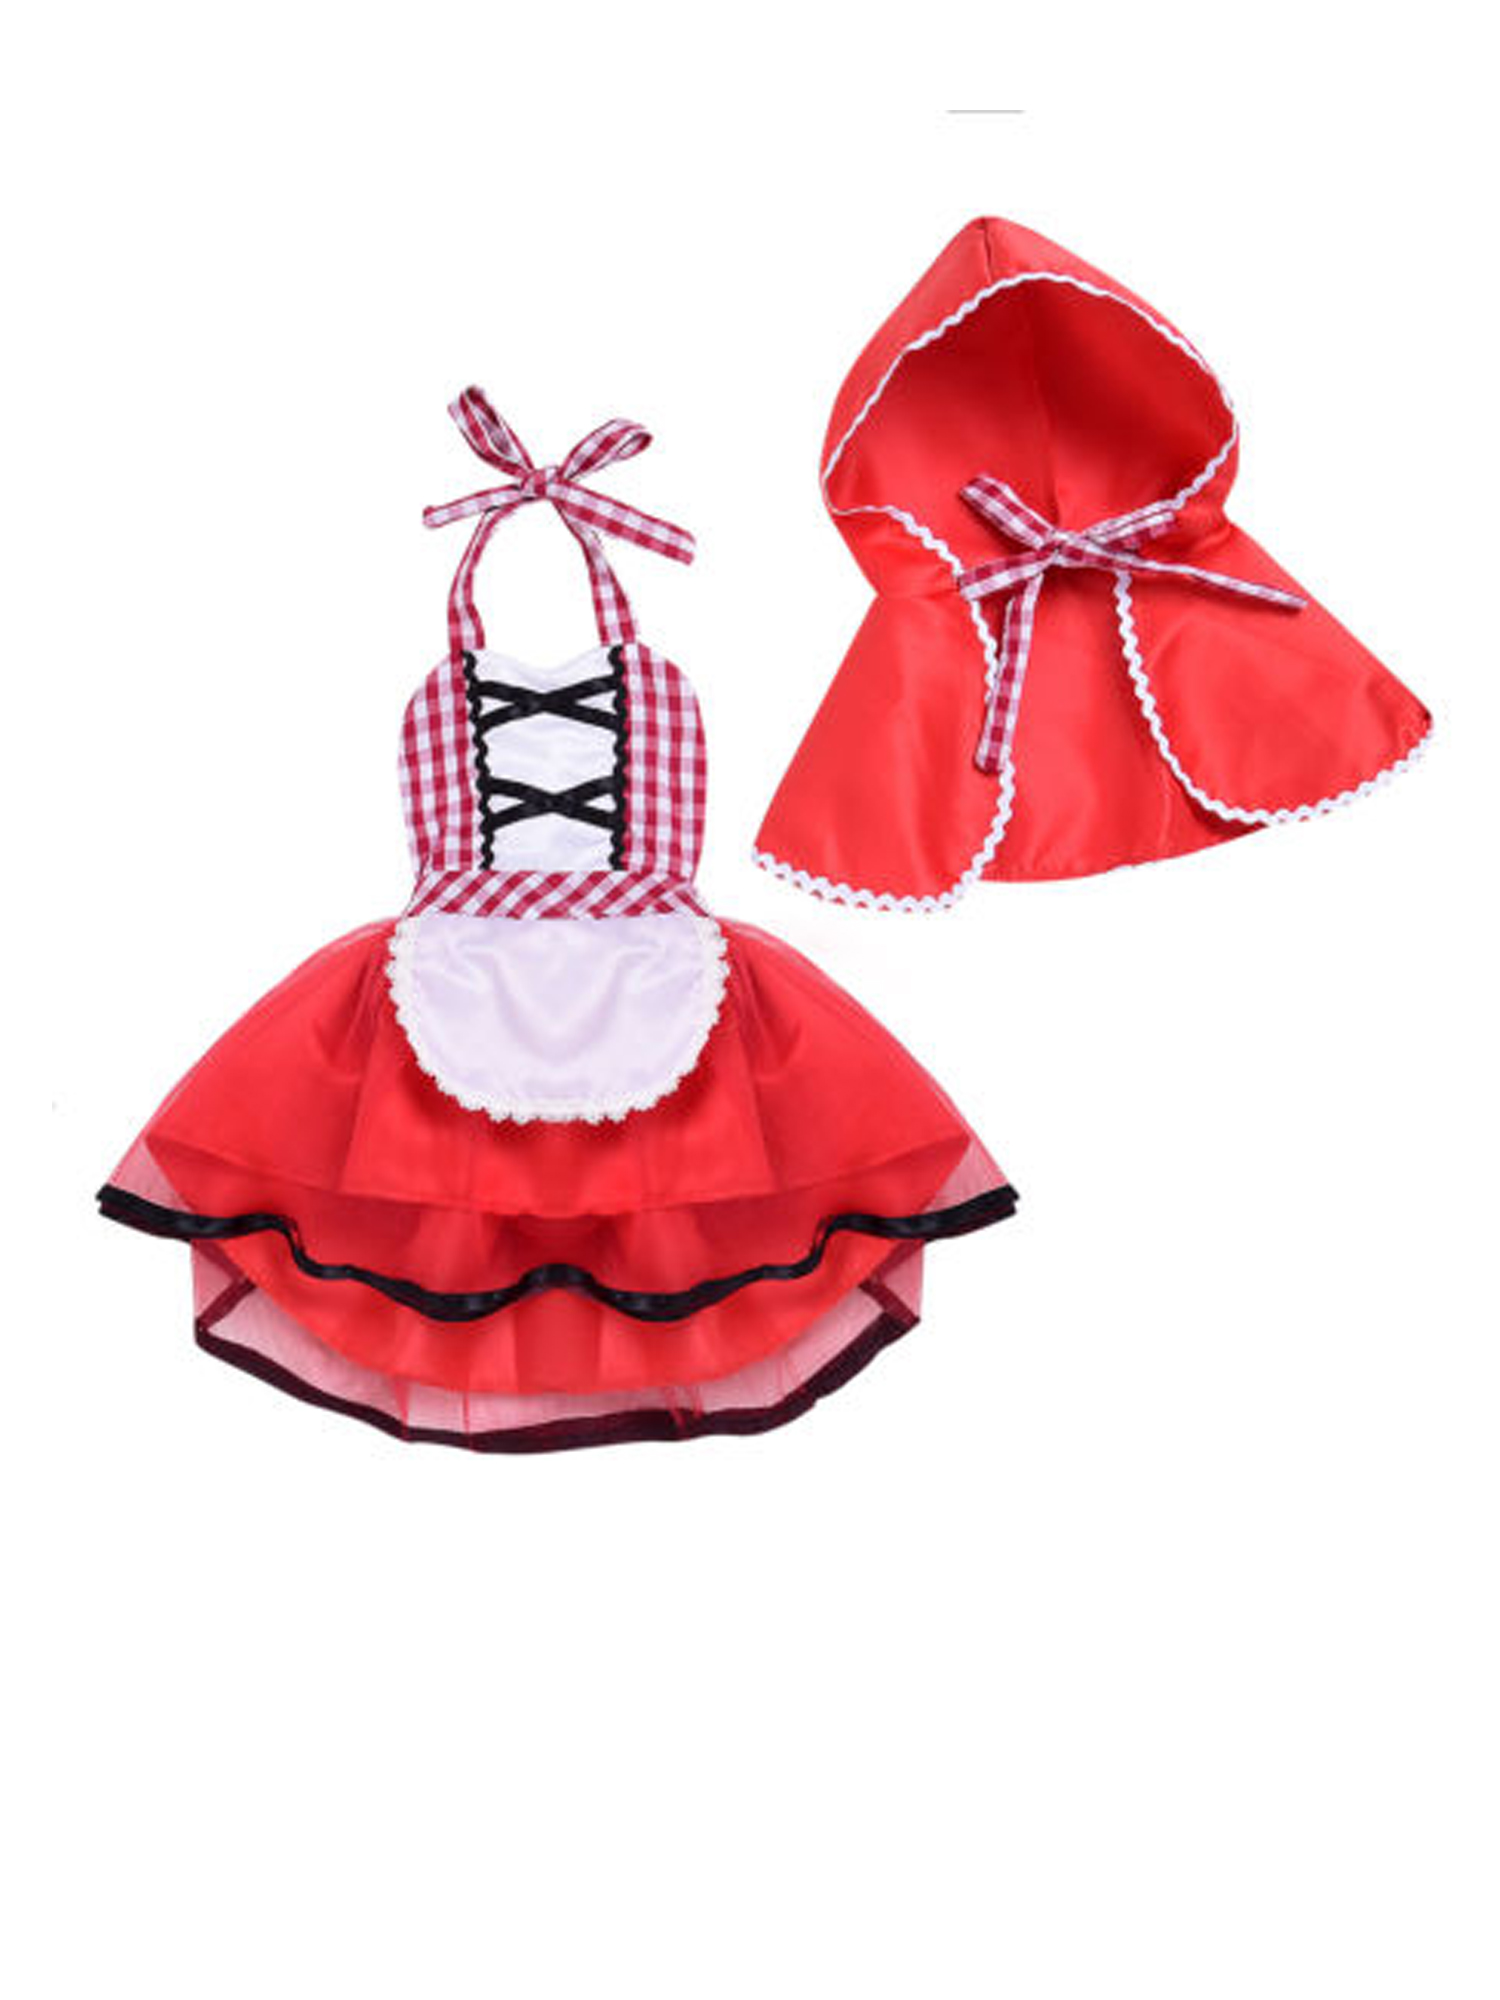 Eyicmarn Cosplay Little Red Riding Hood Garment for Babies with Cape - image 3 of 6